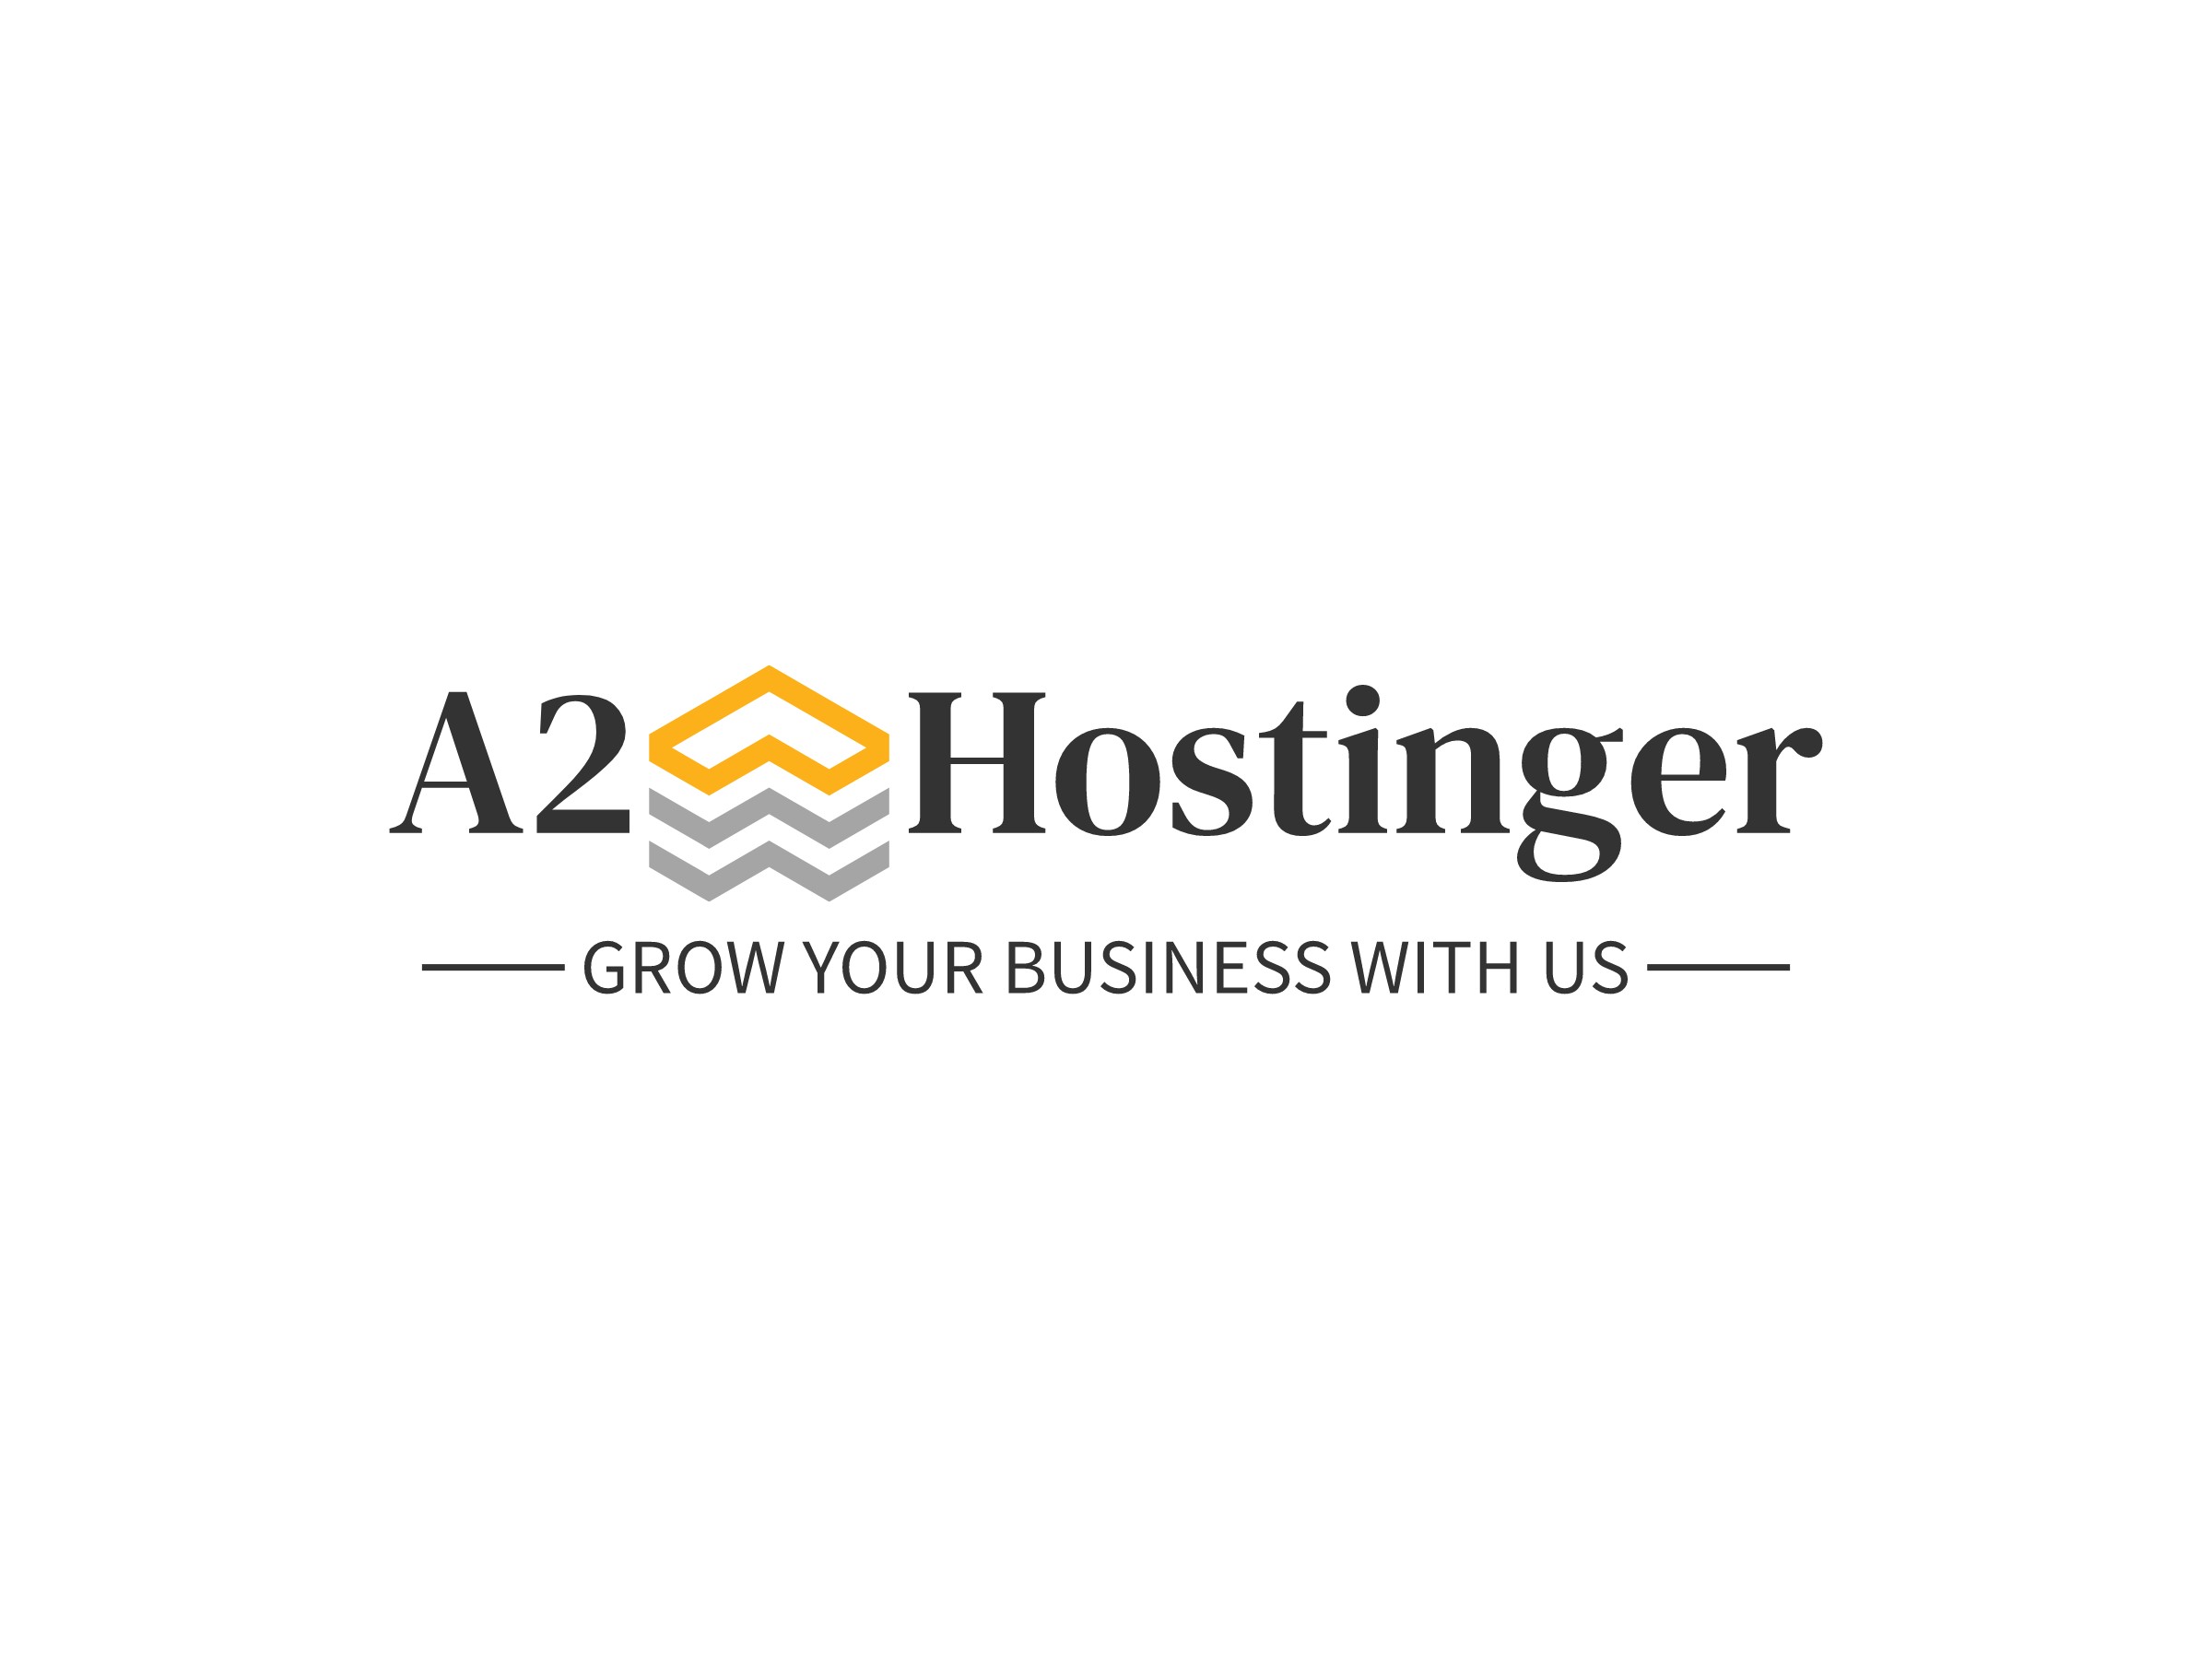 A2 Hostinger - grow your business with us